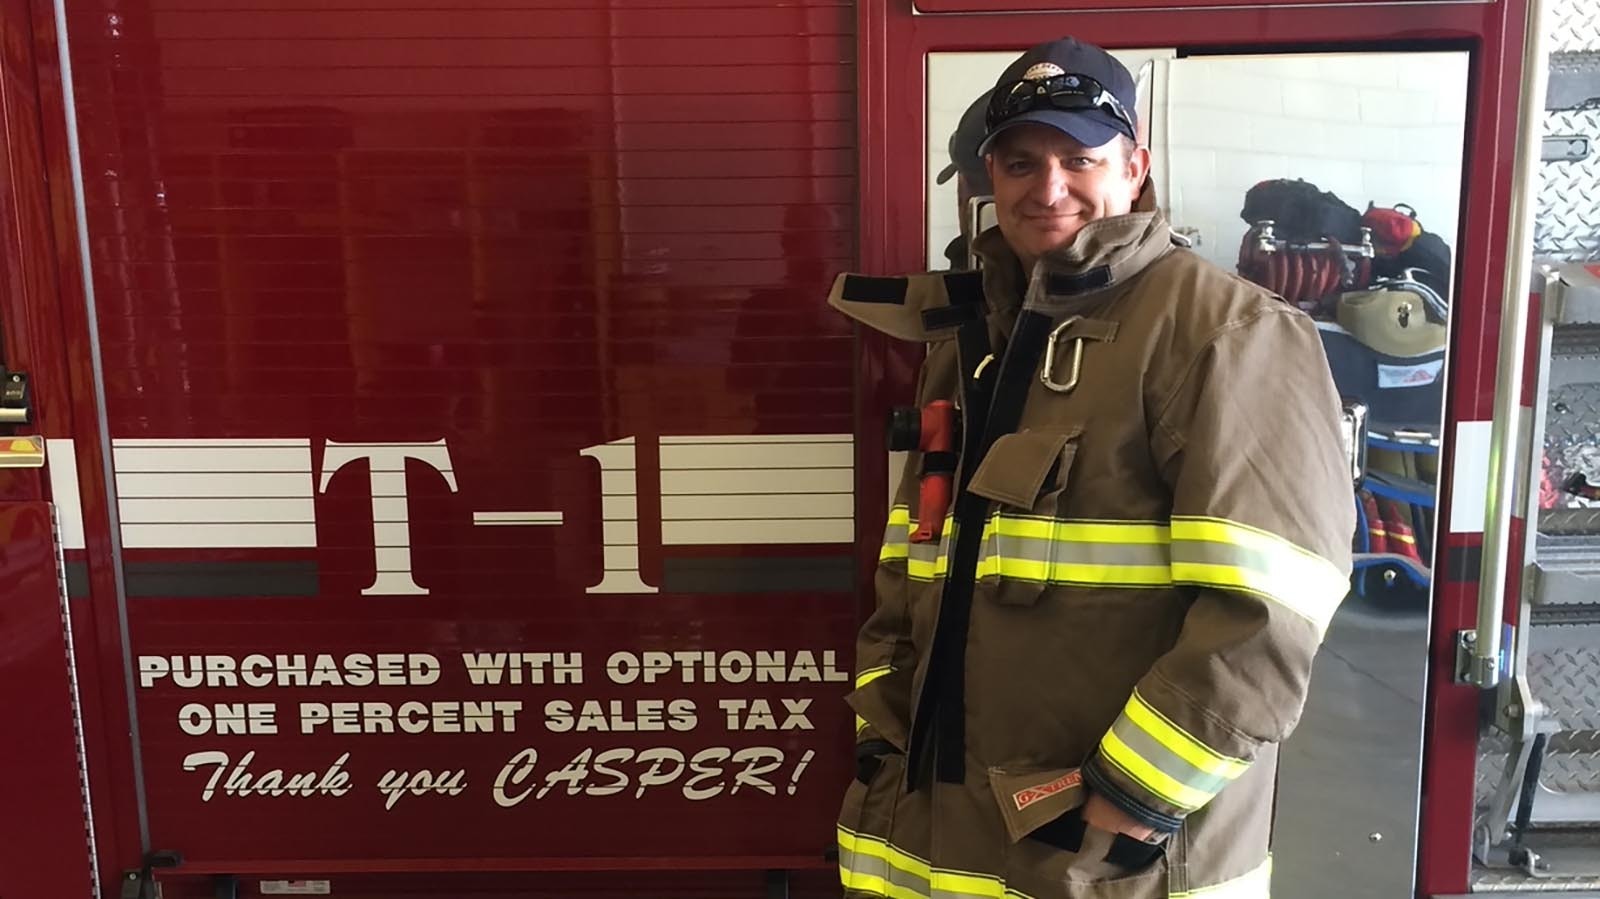 Patrick Stafford said he really enjoys working as a vehicle firefighter. He also teaches first aid and CPR and is certified as a hazardous materials and child safety seat technician.